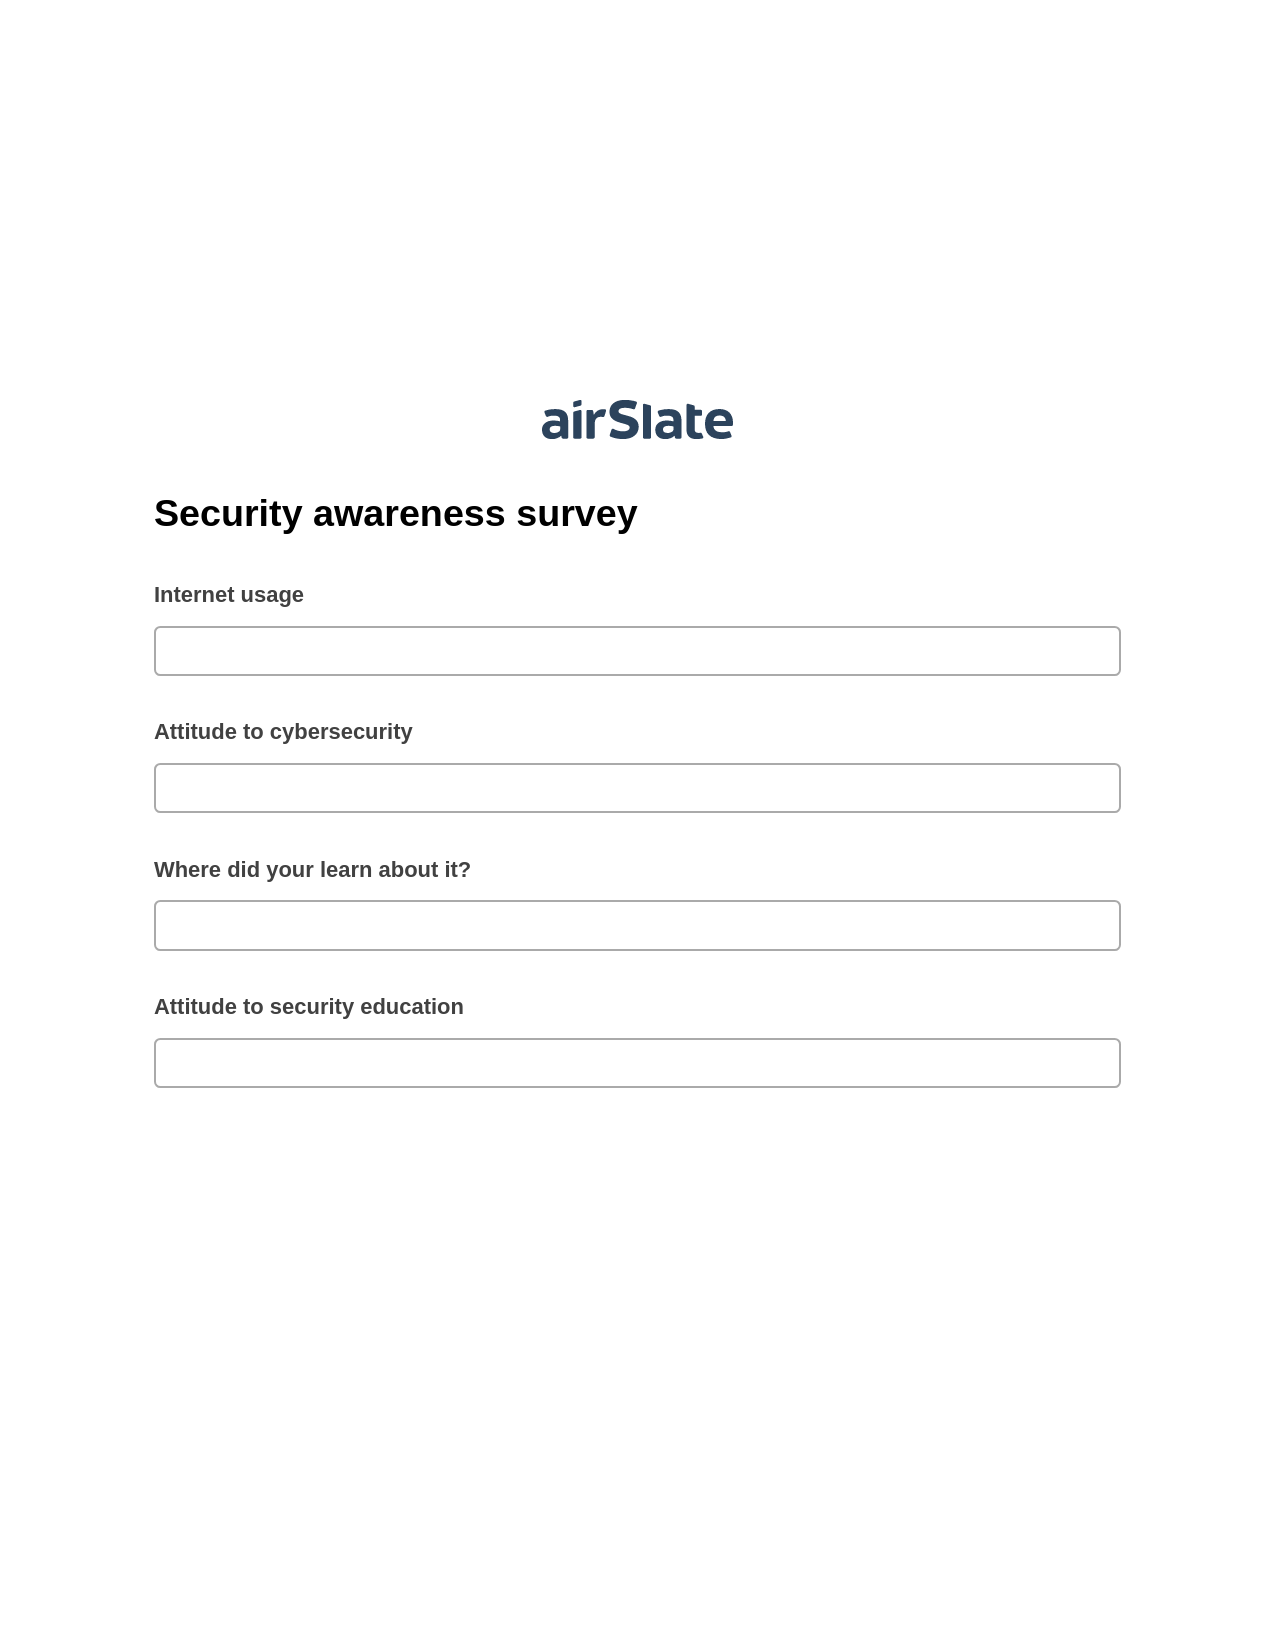 Security awareness survey Pre-fill from Google Sheet Dropdown Options Bot, Email Notification Bot, Post-finish Document Bot